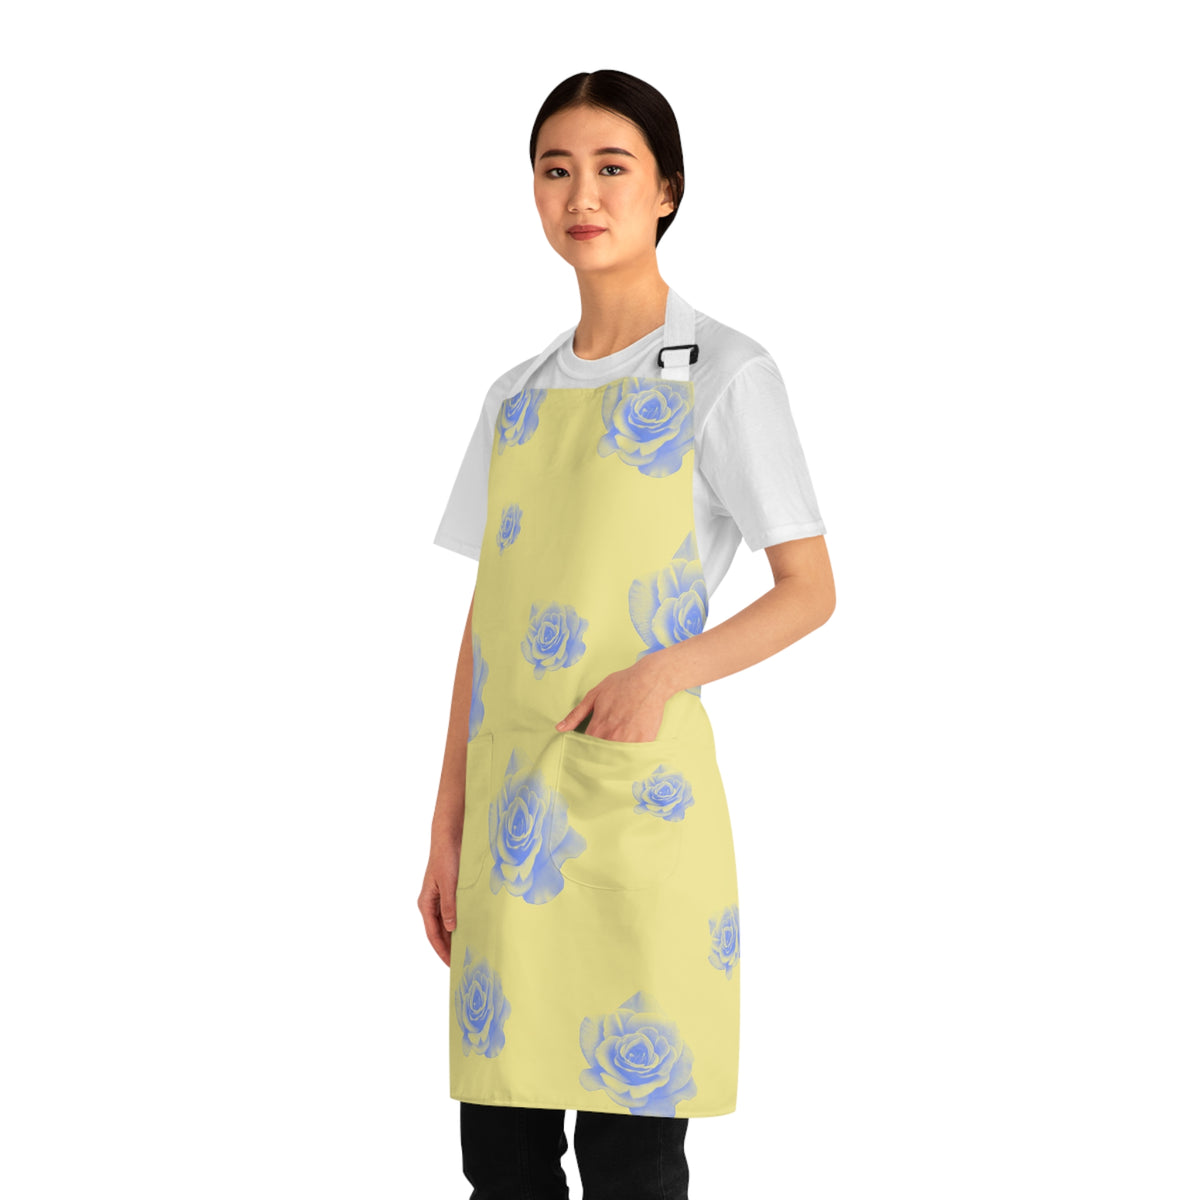 side view of girl wearing a grilling apron with a yellow and blue rose pattern on it and white straps with her left hand in apron pocket